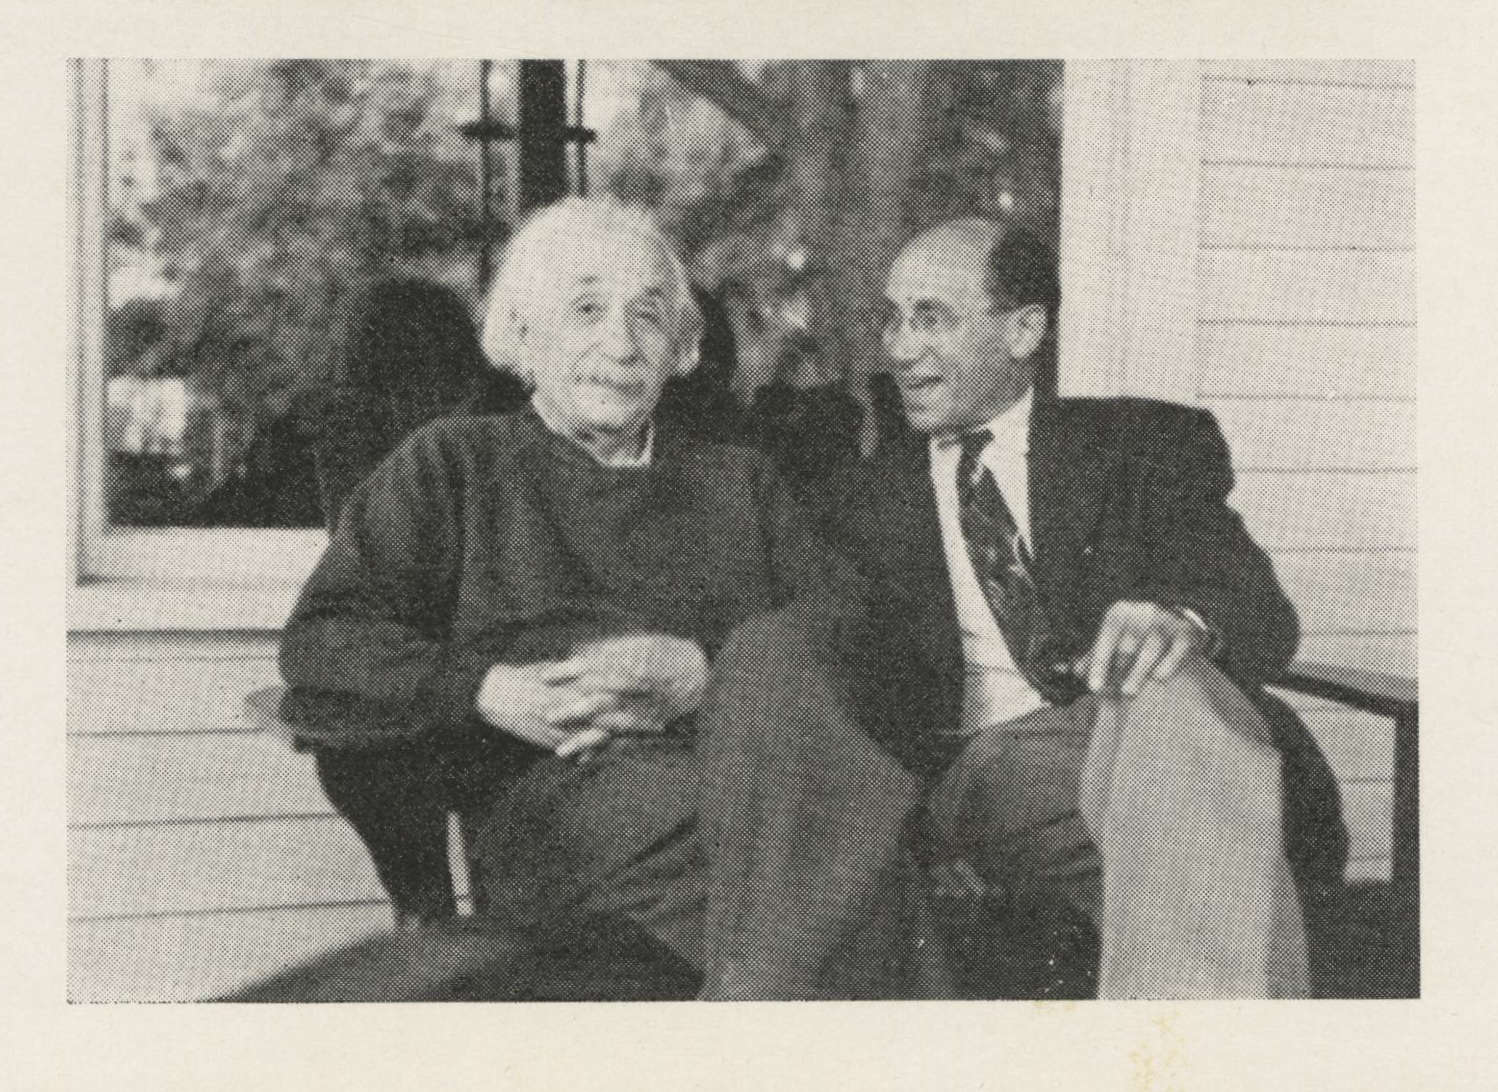 Vintage black-and-white photo of Albert Einstein seated on porch bench with Frank Gerald Back.